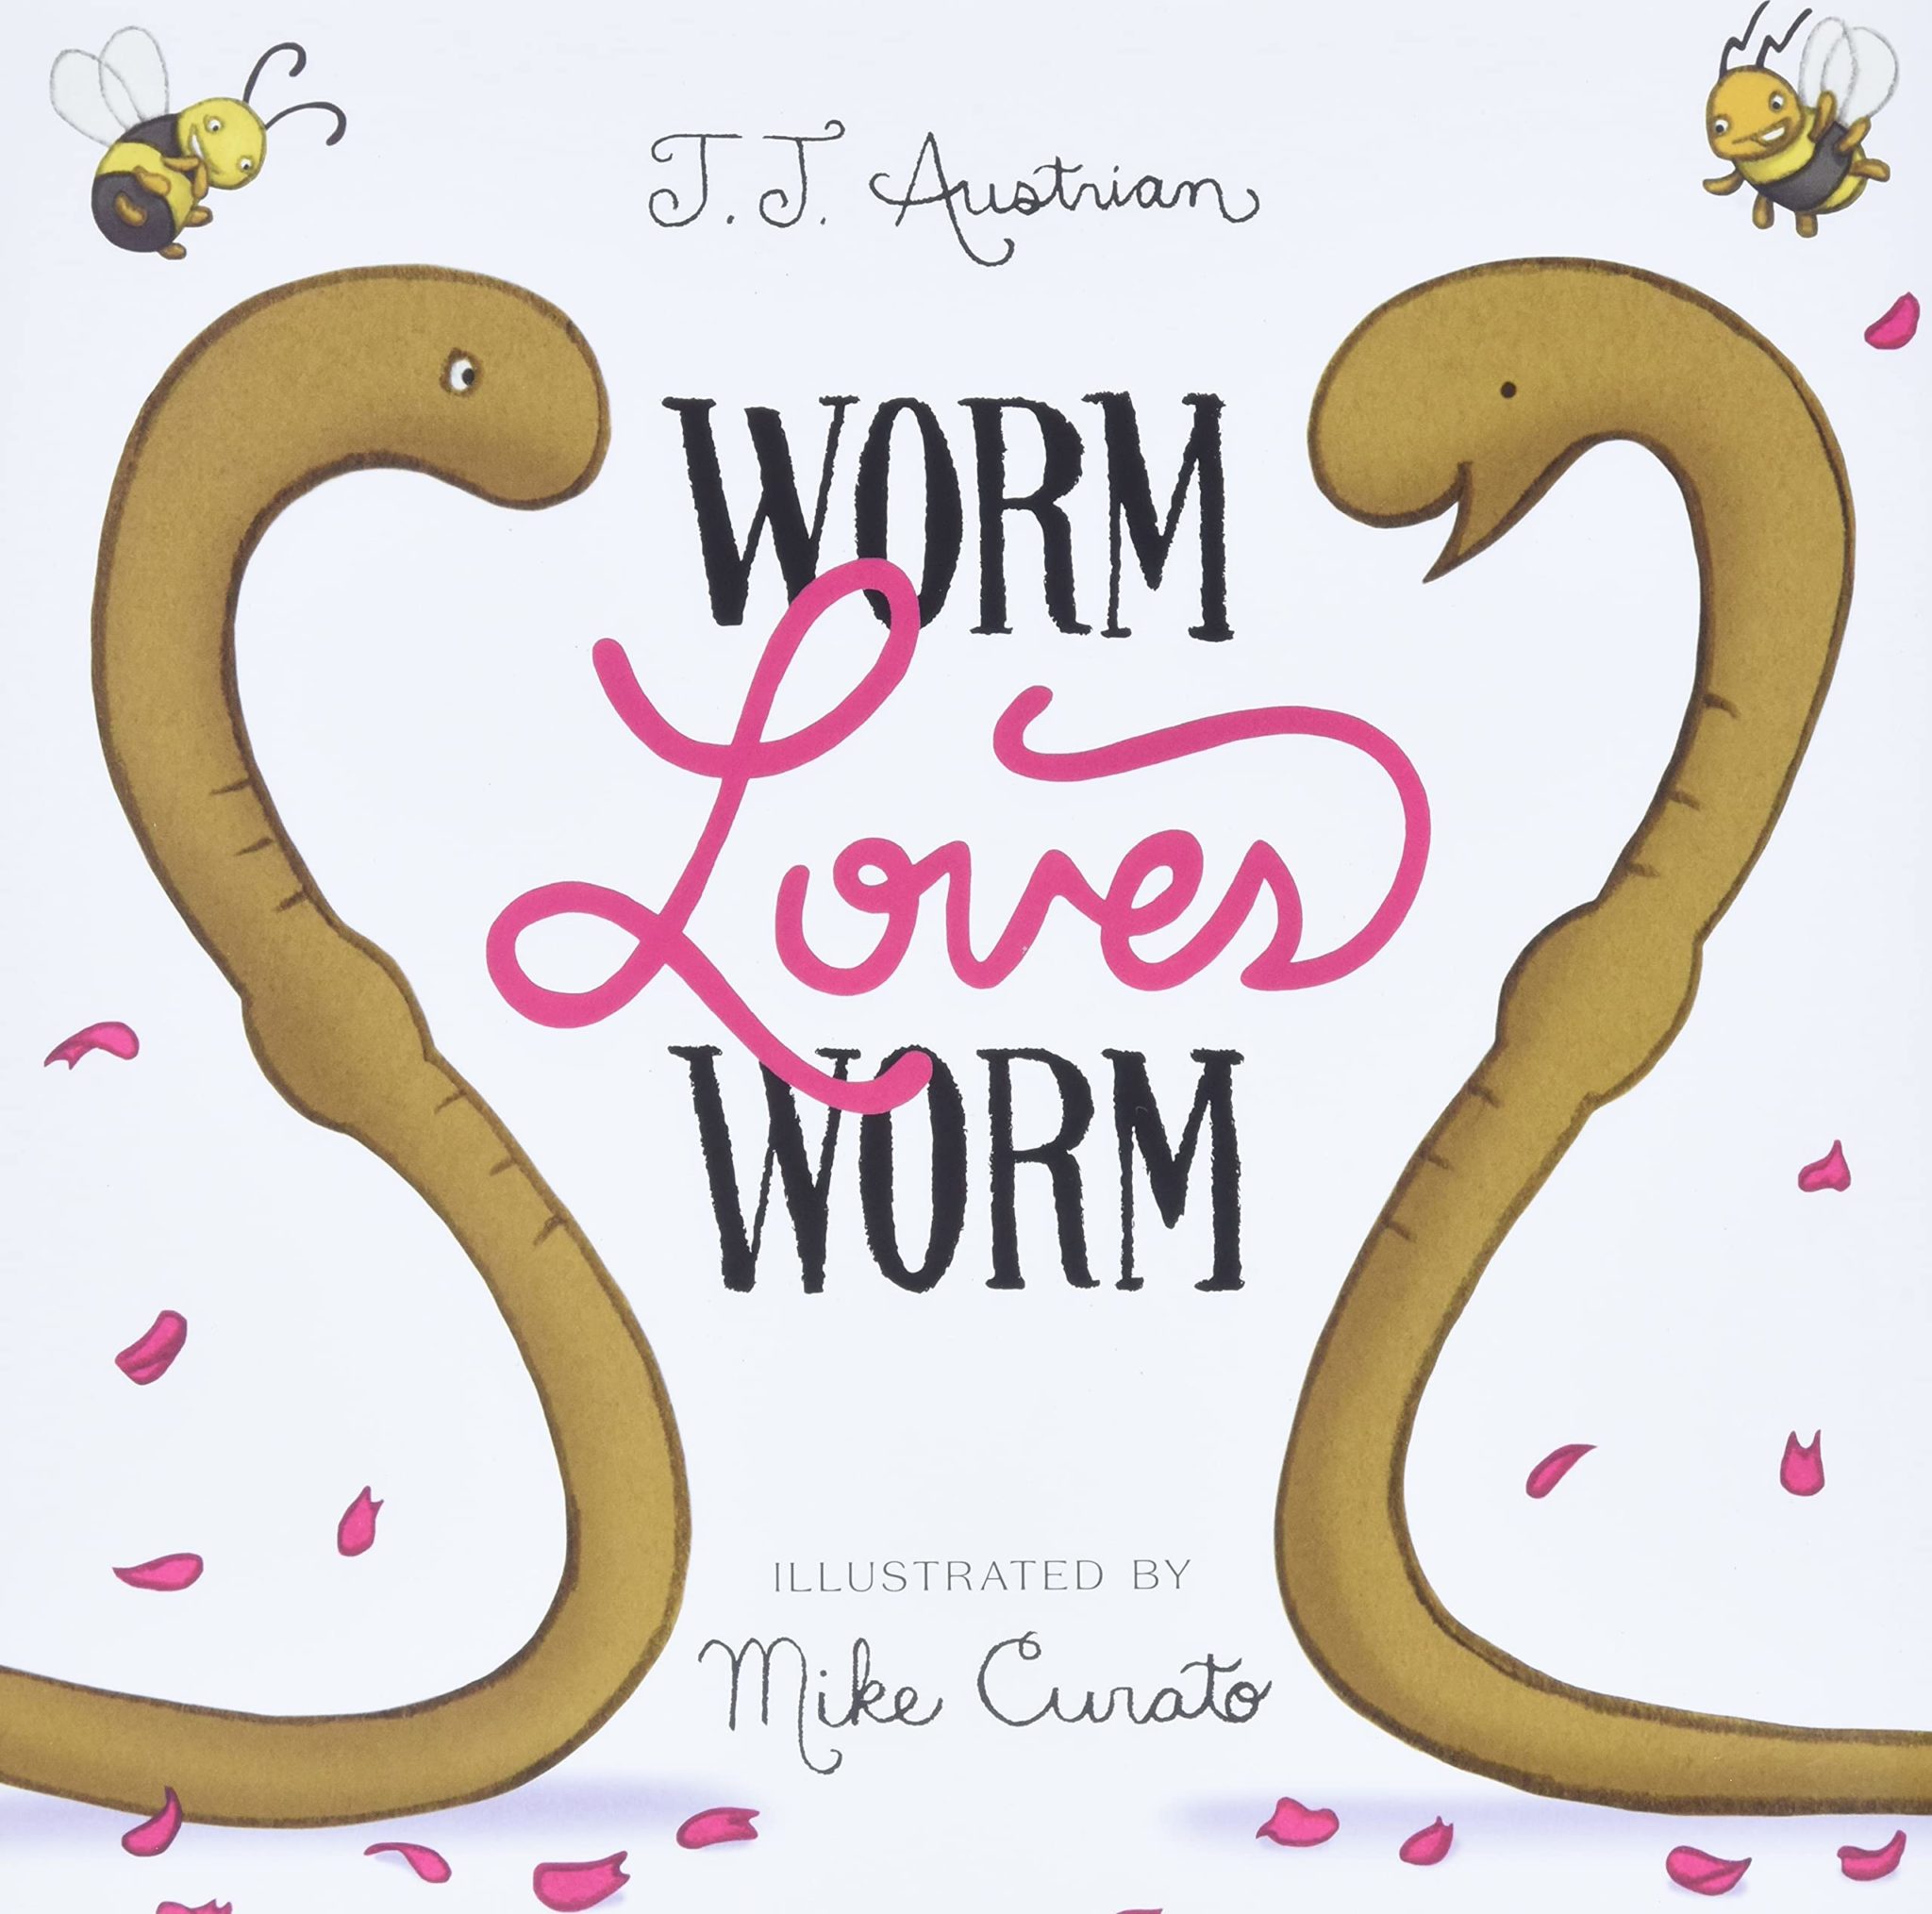 The cover of the book "Worm Loves Worm" features two cartoon worms smiling at each other across a white background. A bee watches over them as pink flower petals fall around them.